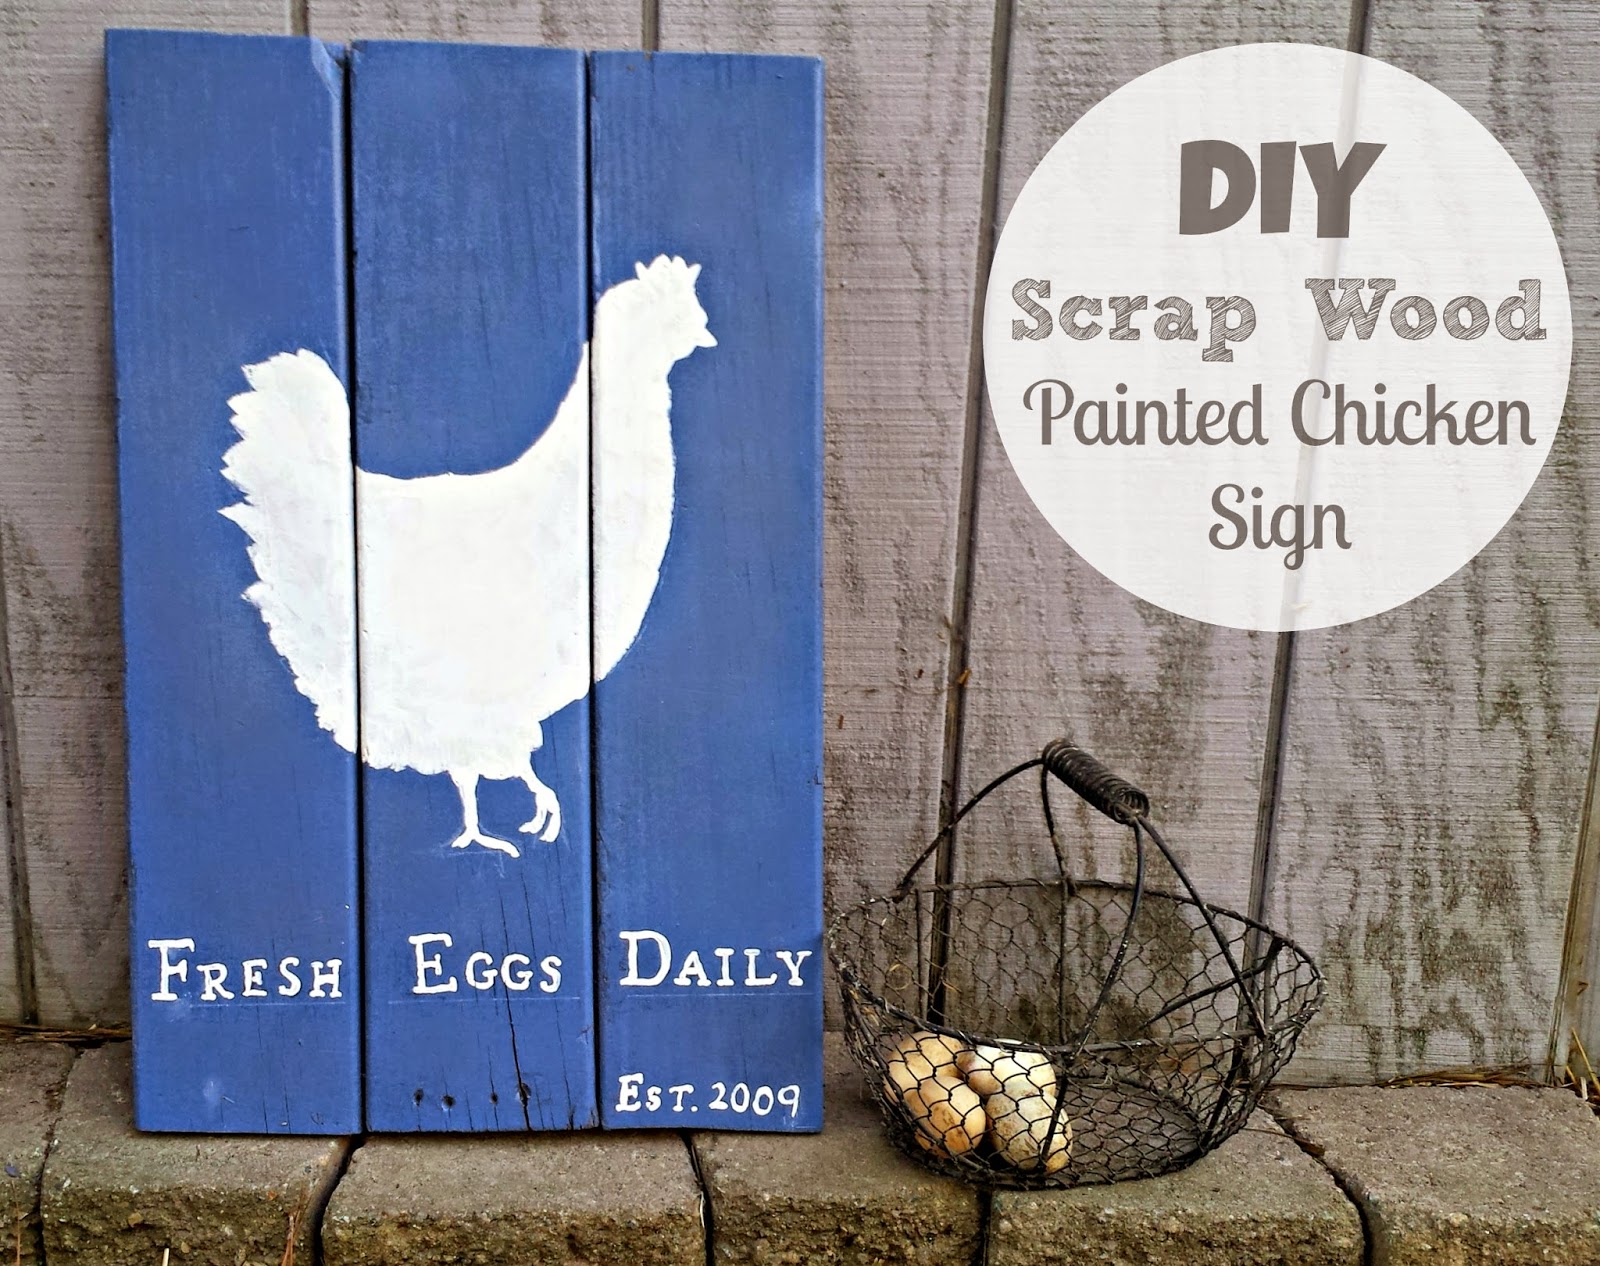 DIY Scrap Wood Painted Chicken Sign | Fresh Eggs Daily®